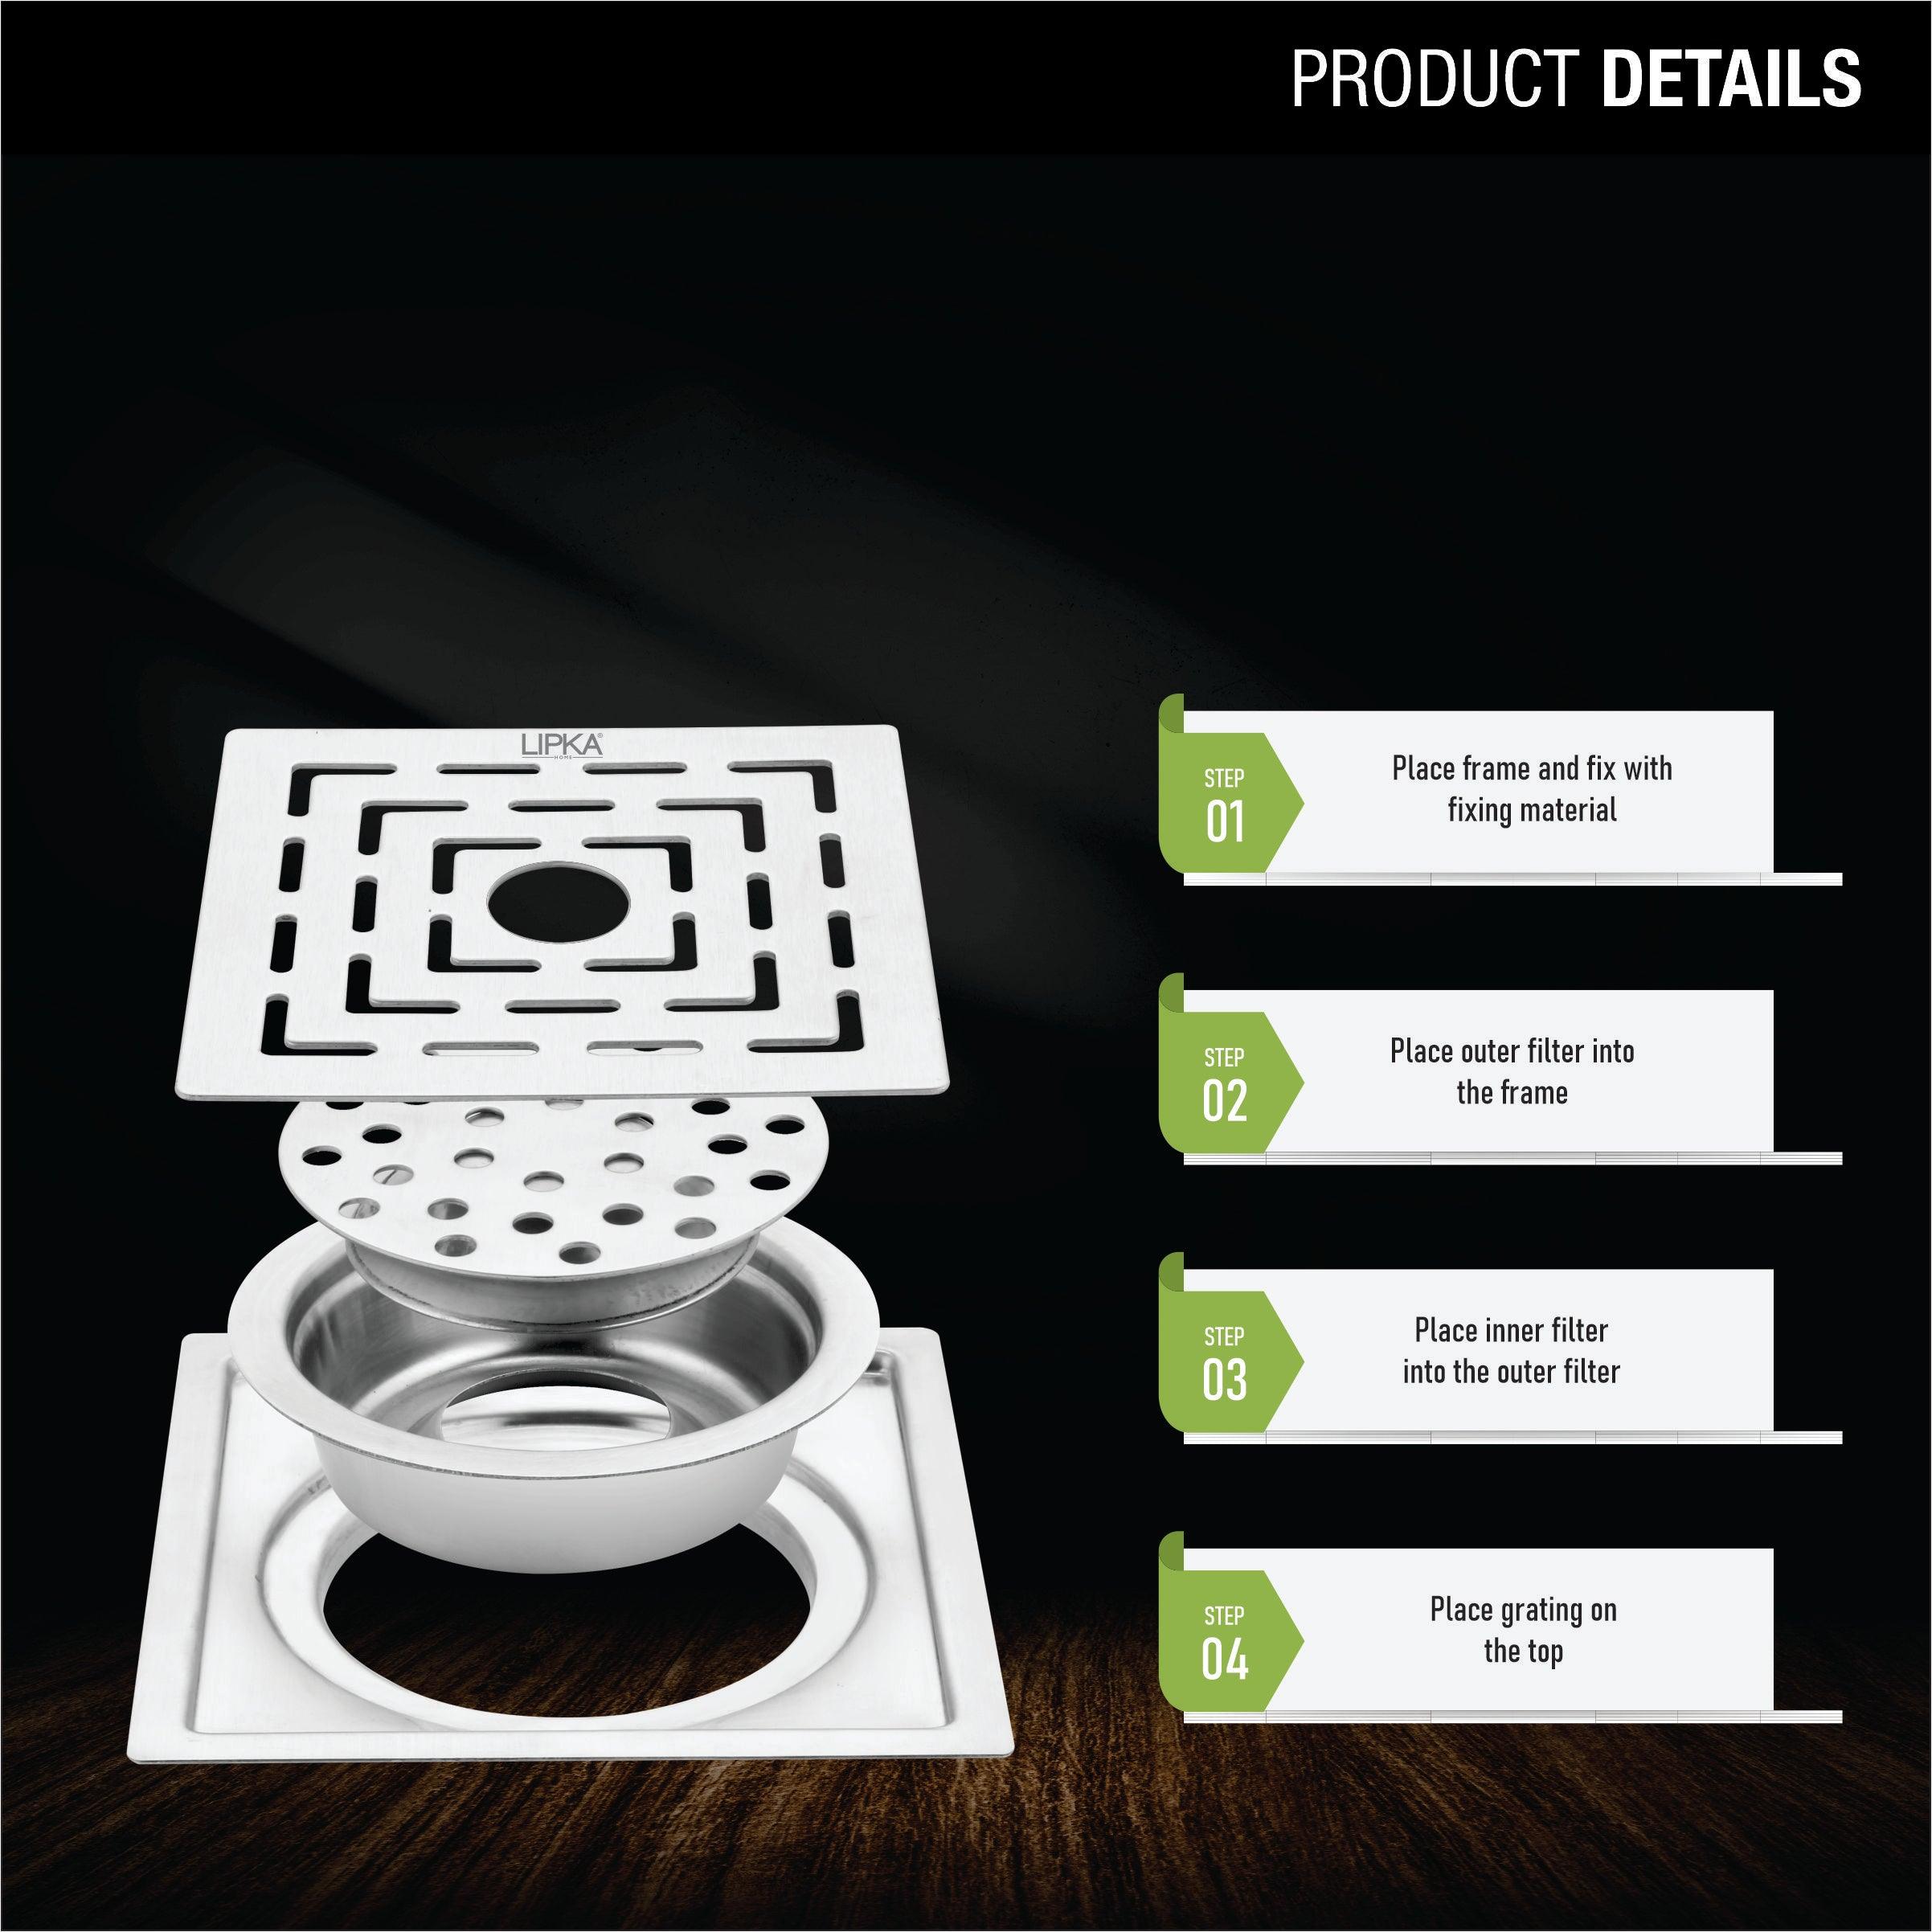 Orange Exclusive Square Flat Cut Floor Drain (5 Inches) with Cockroach Trap And Hole product details